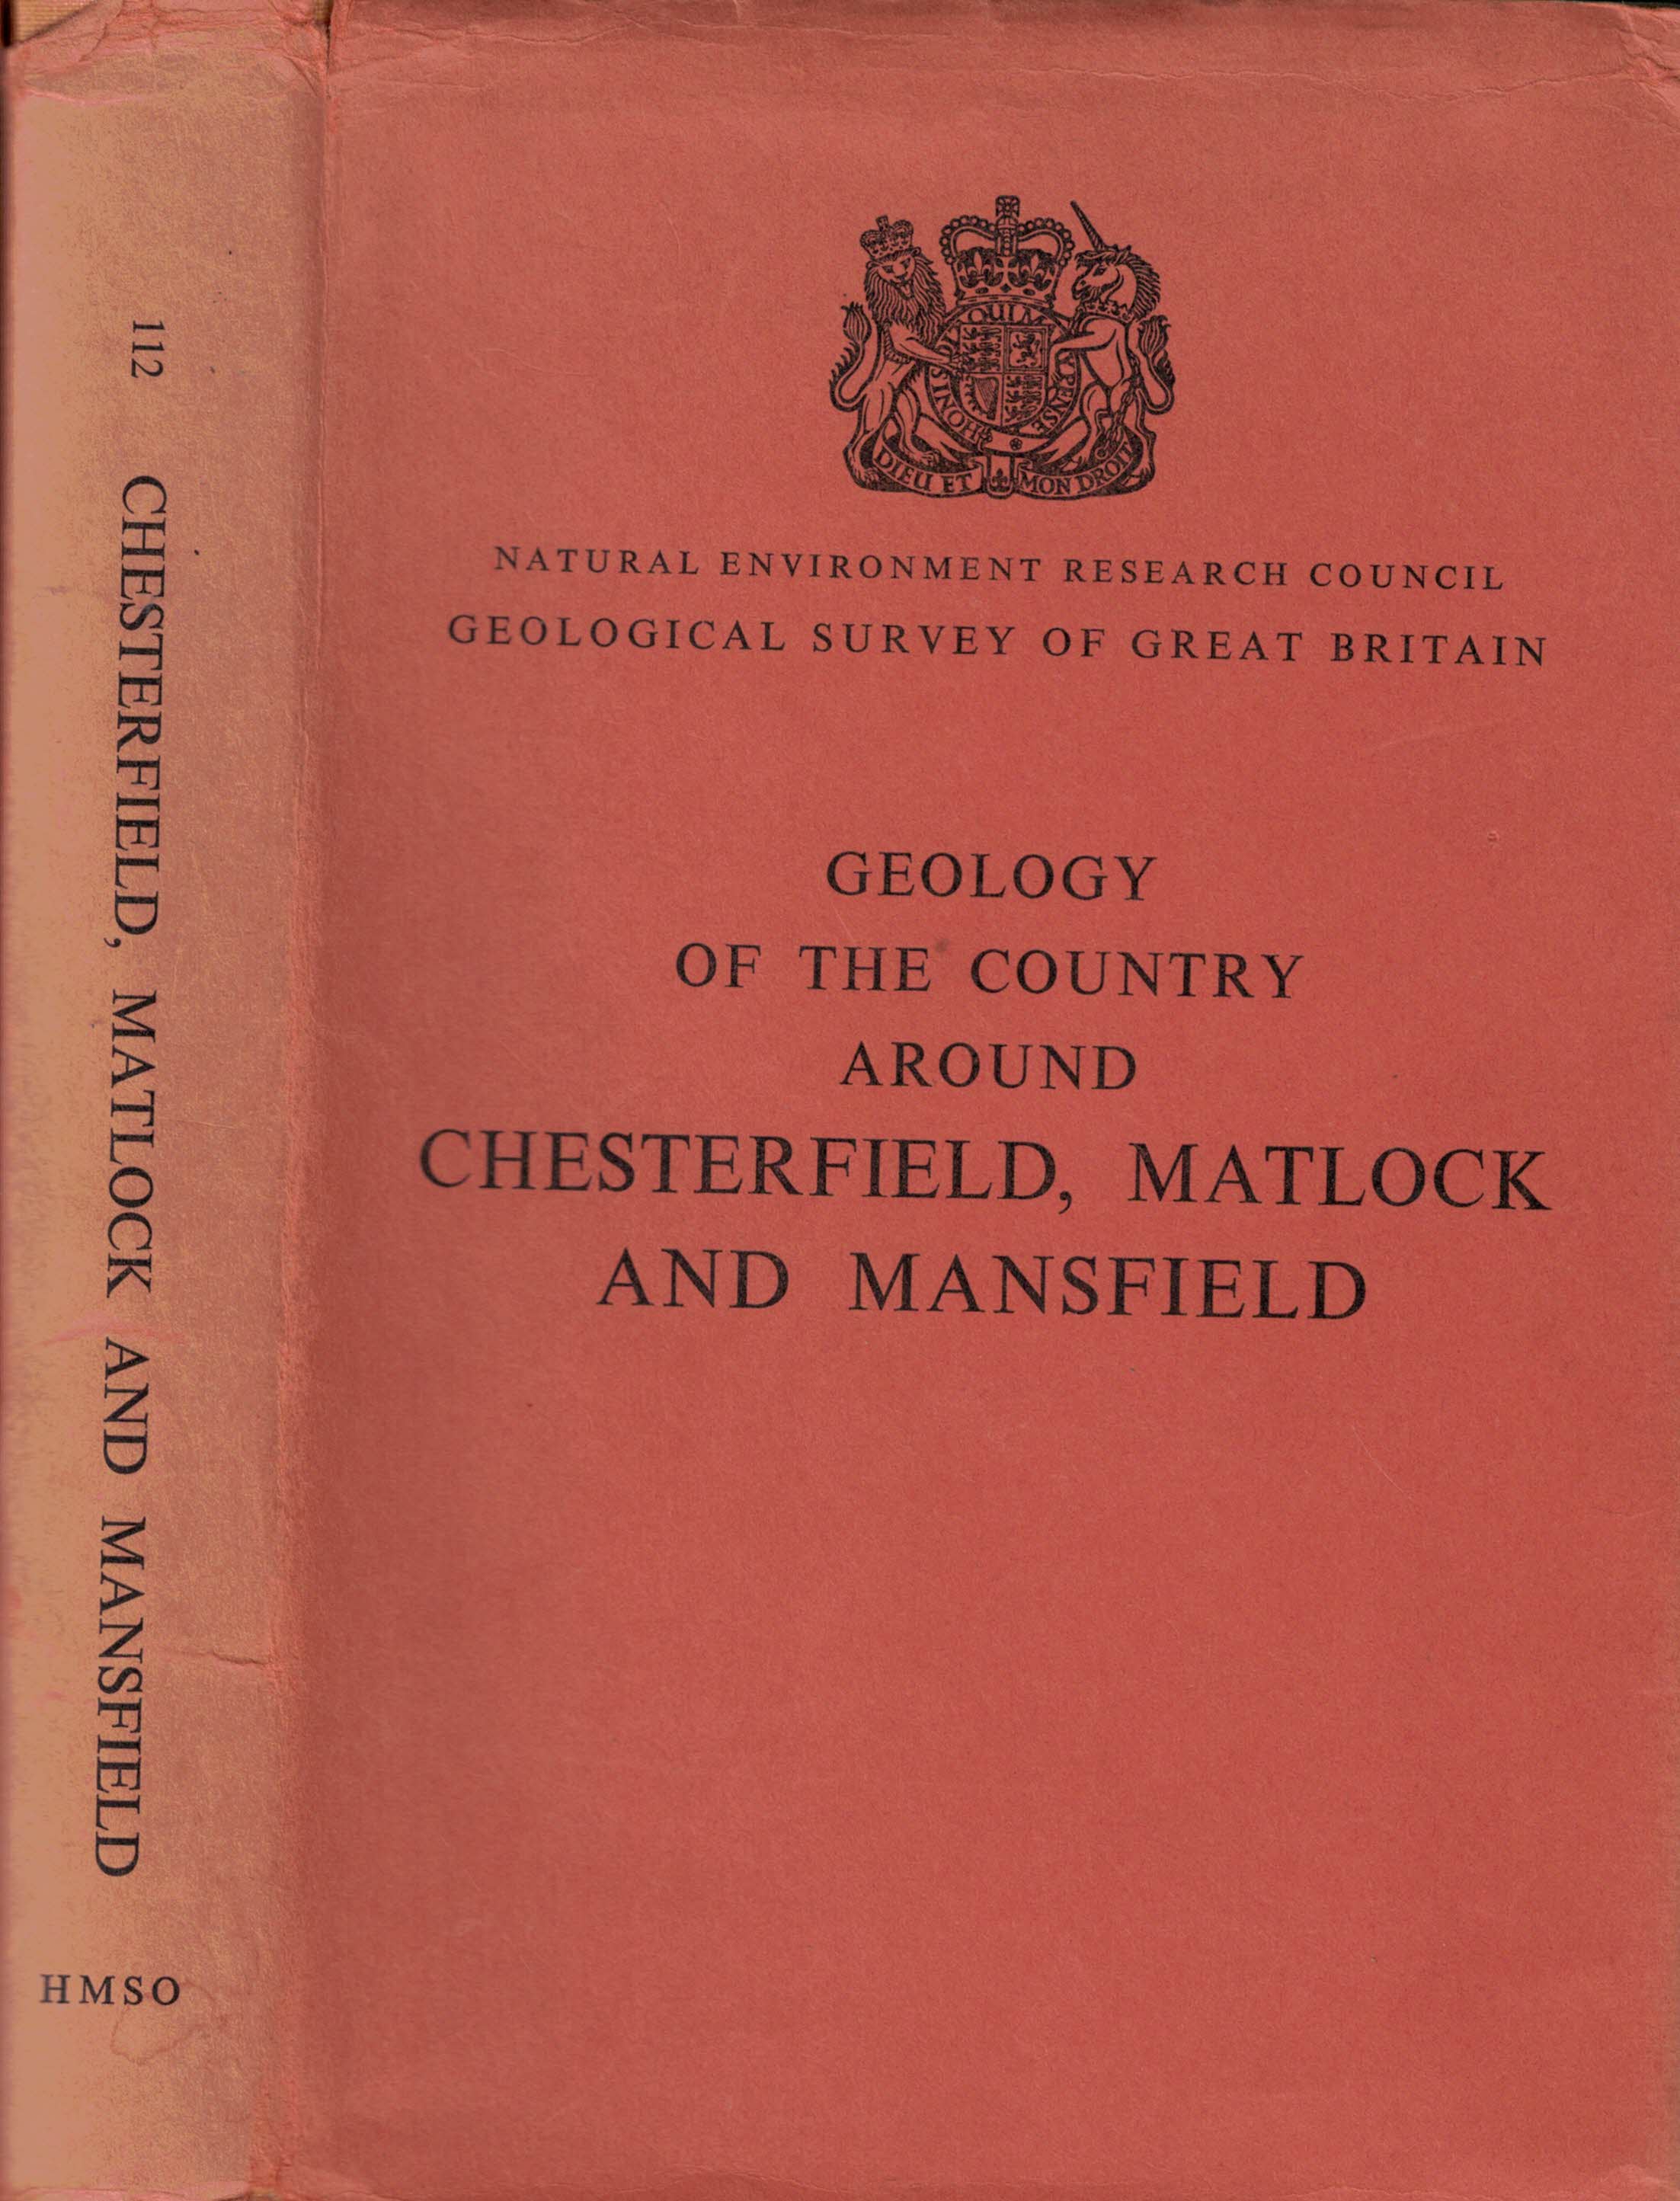 Memoirs of the Geological Survey of Great Britain: England and Wales. Geology of the Country around Chesterfield, Matlock and Mansfield.